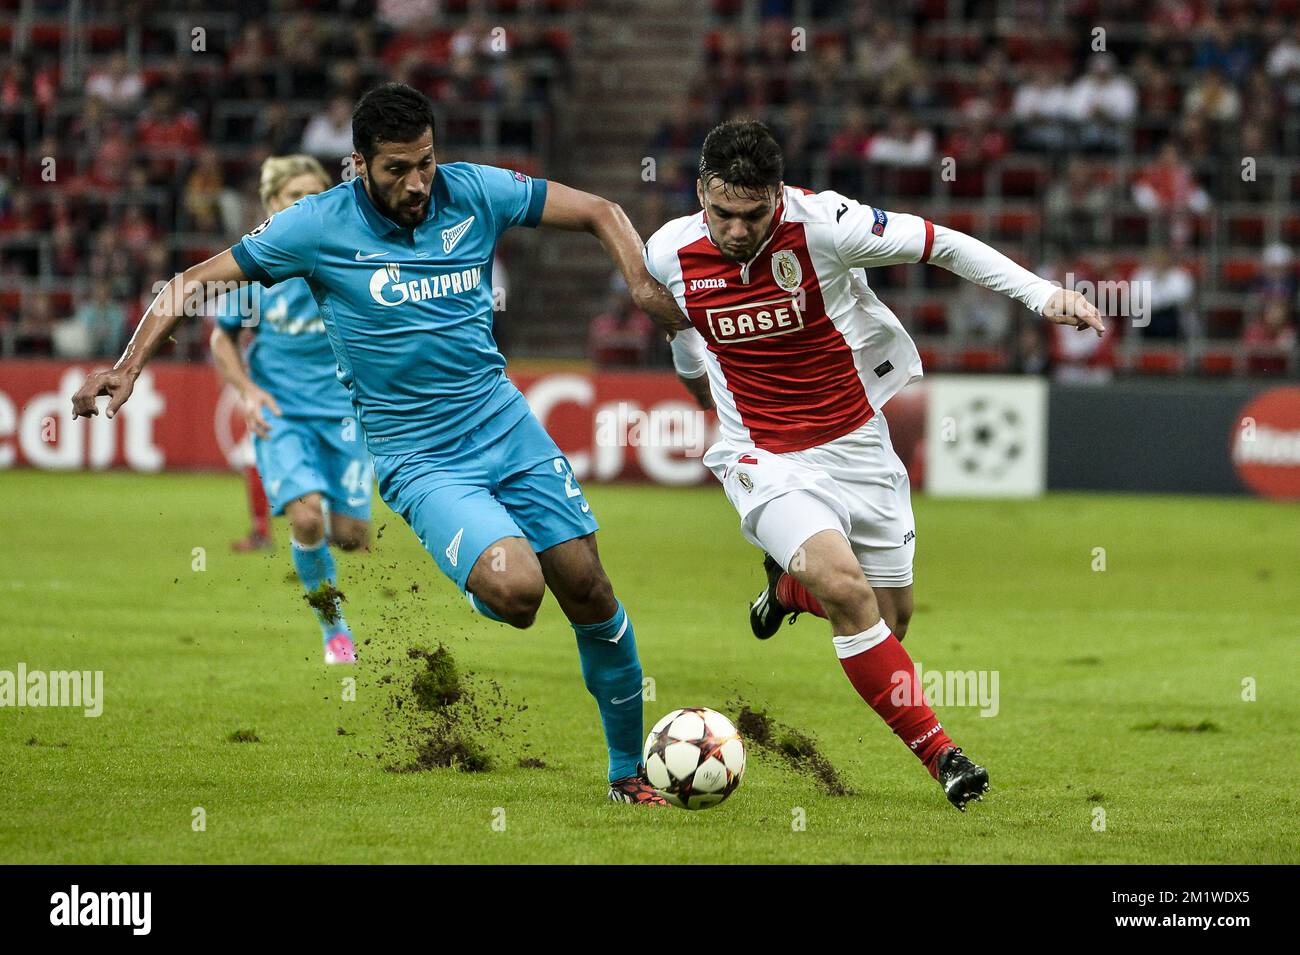 Zenit's Ezequiel Garay and Standard's Anthony Tony Watt pictured during the first leg match between Belgian first division soccer team Standard de Liege and Russian team FC Zenit Saint Petersburg in the playoffs for the UEFA Champions League competition, Wednesday 20 August 2014, in Liege. Stock Photo